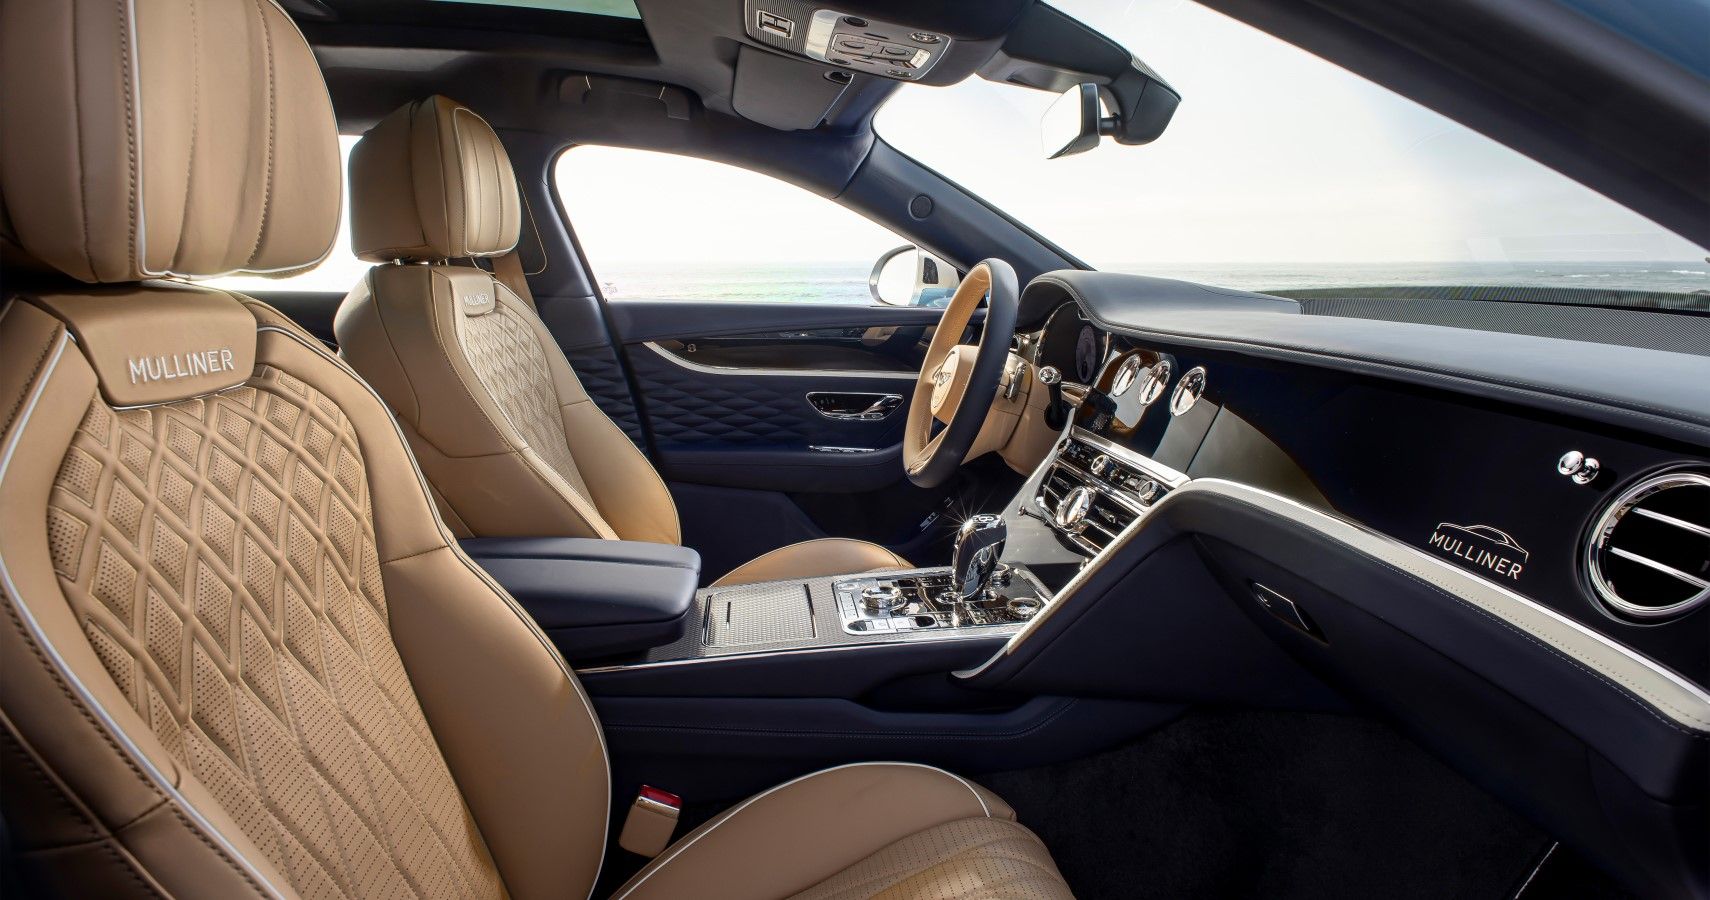 A Peek Inside The Bentley Flying Spur's Luxurious Interior